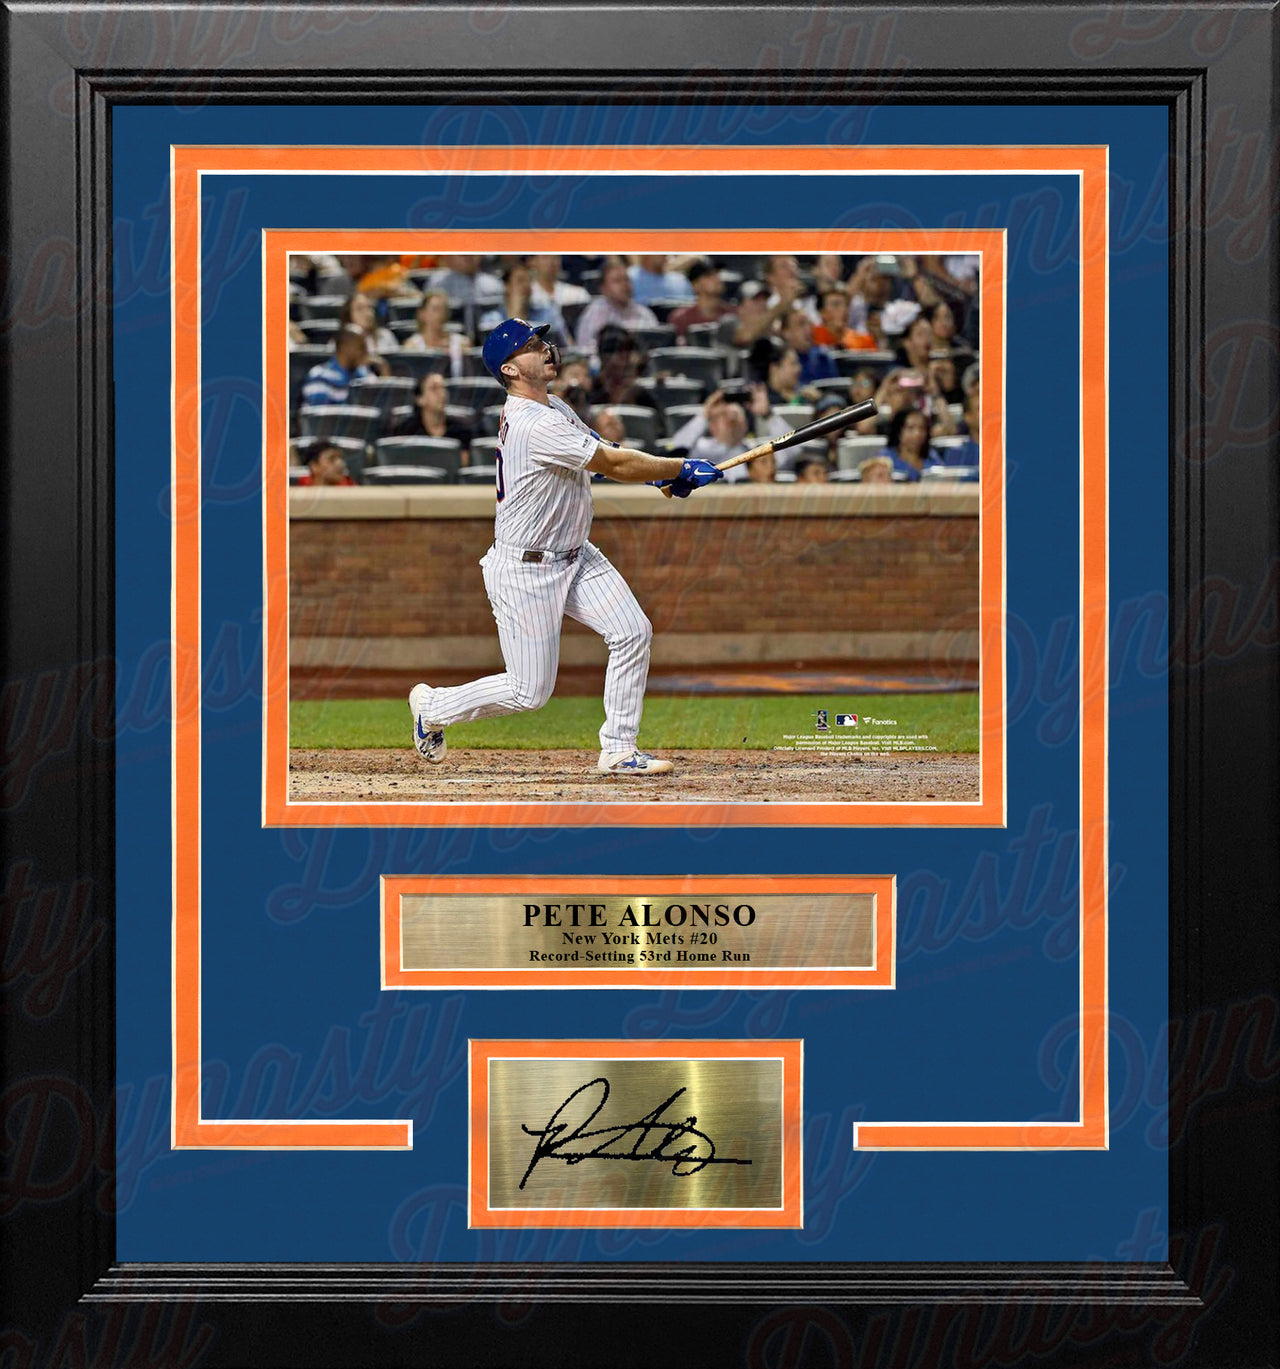 Pete Alonso Record-Breaking Home Run New York Mets 8" x 10" Framed Photo with Engraved Autograph - Dynasty Sports & Framing 